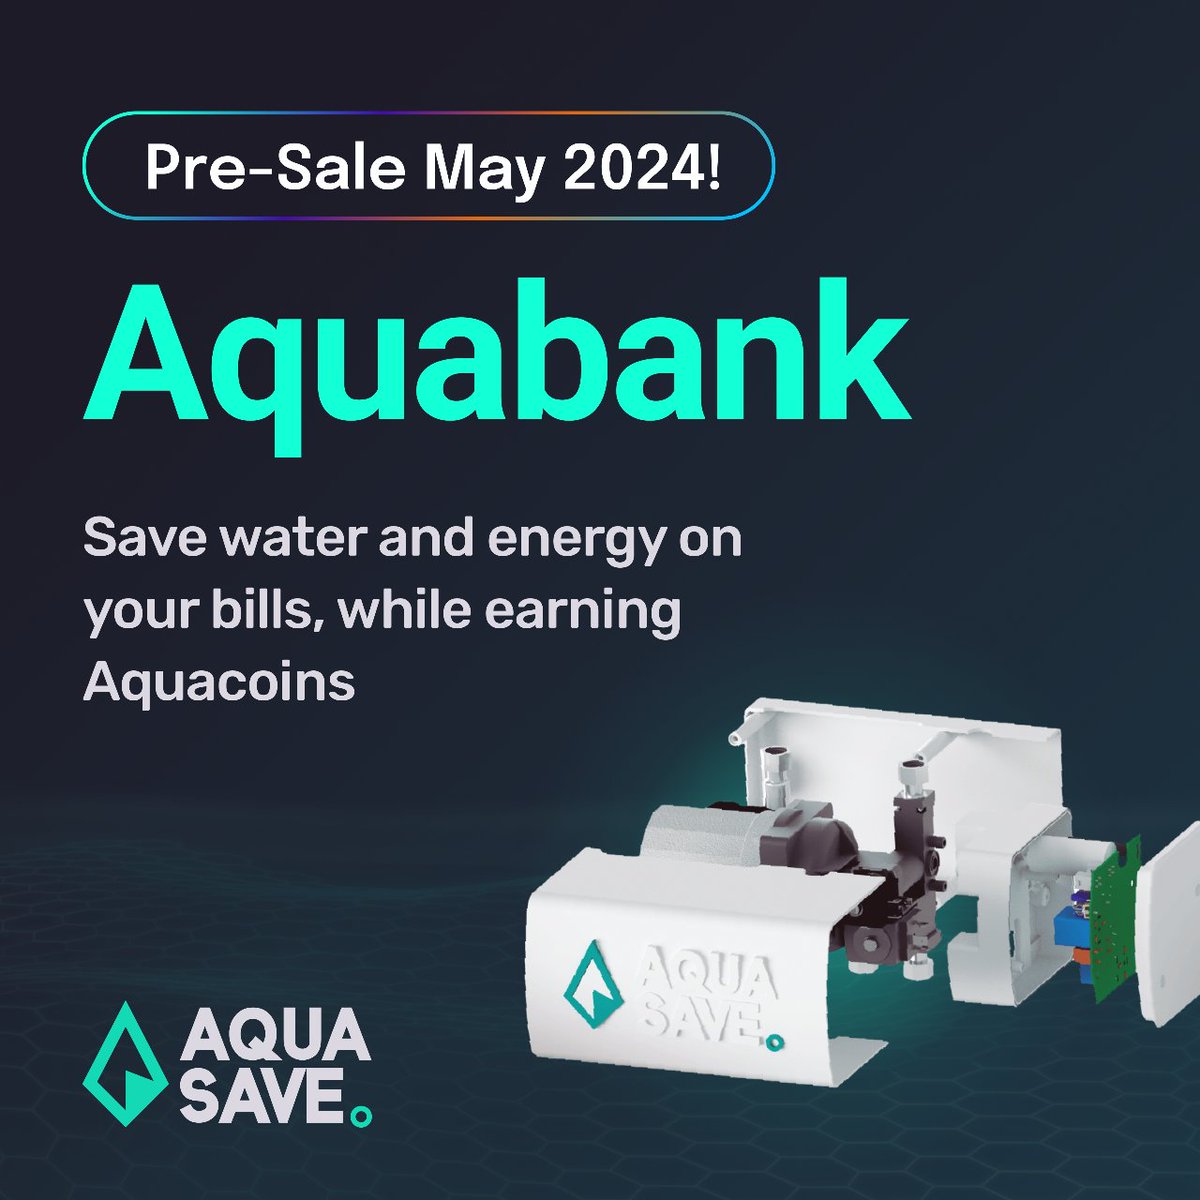 The AquaBank Pre-Sale is just around the corner. 🚨 Subscribe now to our whitelist to secure one of the 1000 AquaBanks at a discounted price of only €549. Be part of a sustainable, water-saving future while saving energy and earning money. 💧💰